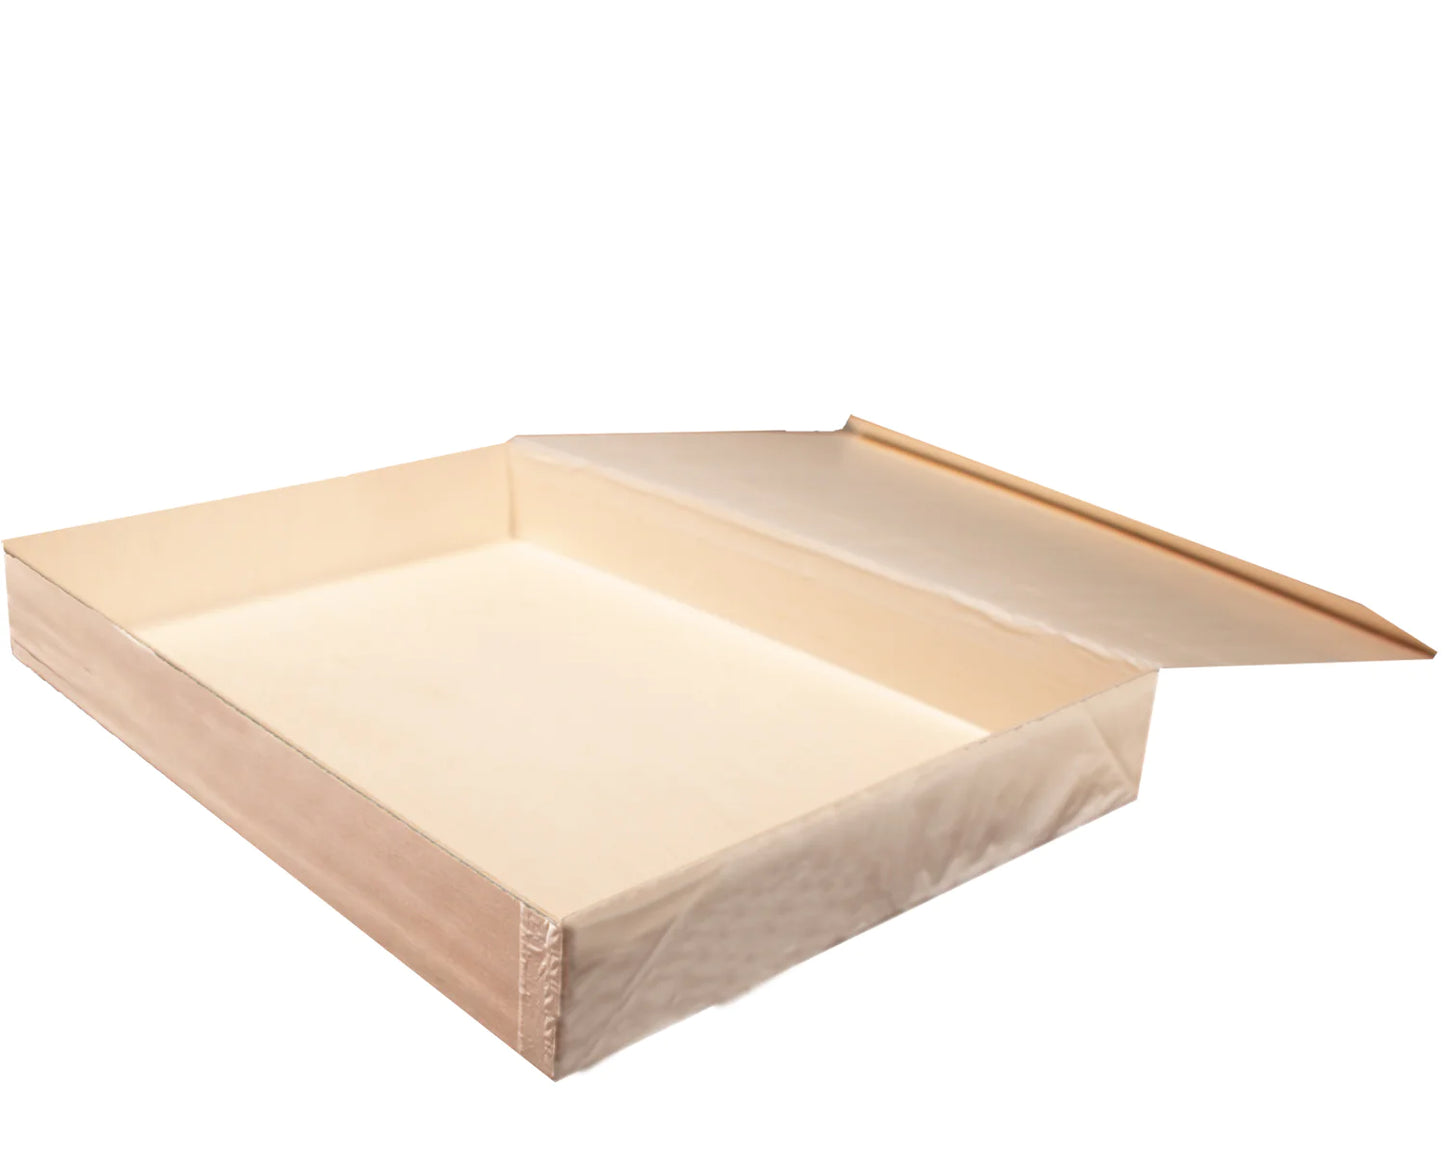 11" x 15" x 2" Collapsible Food Box w/ Attached Lid | Extra Large